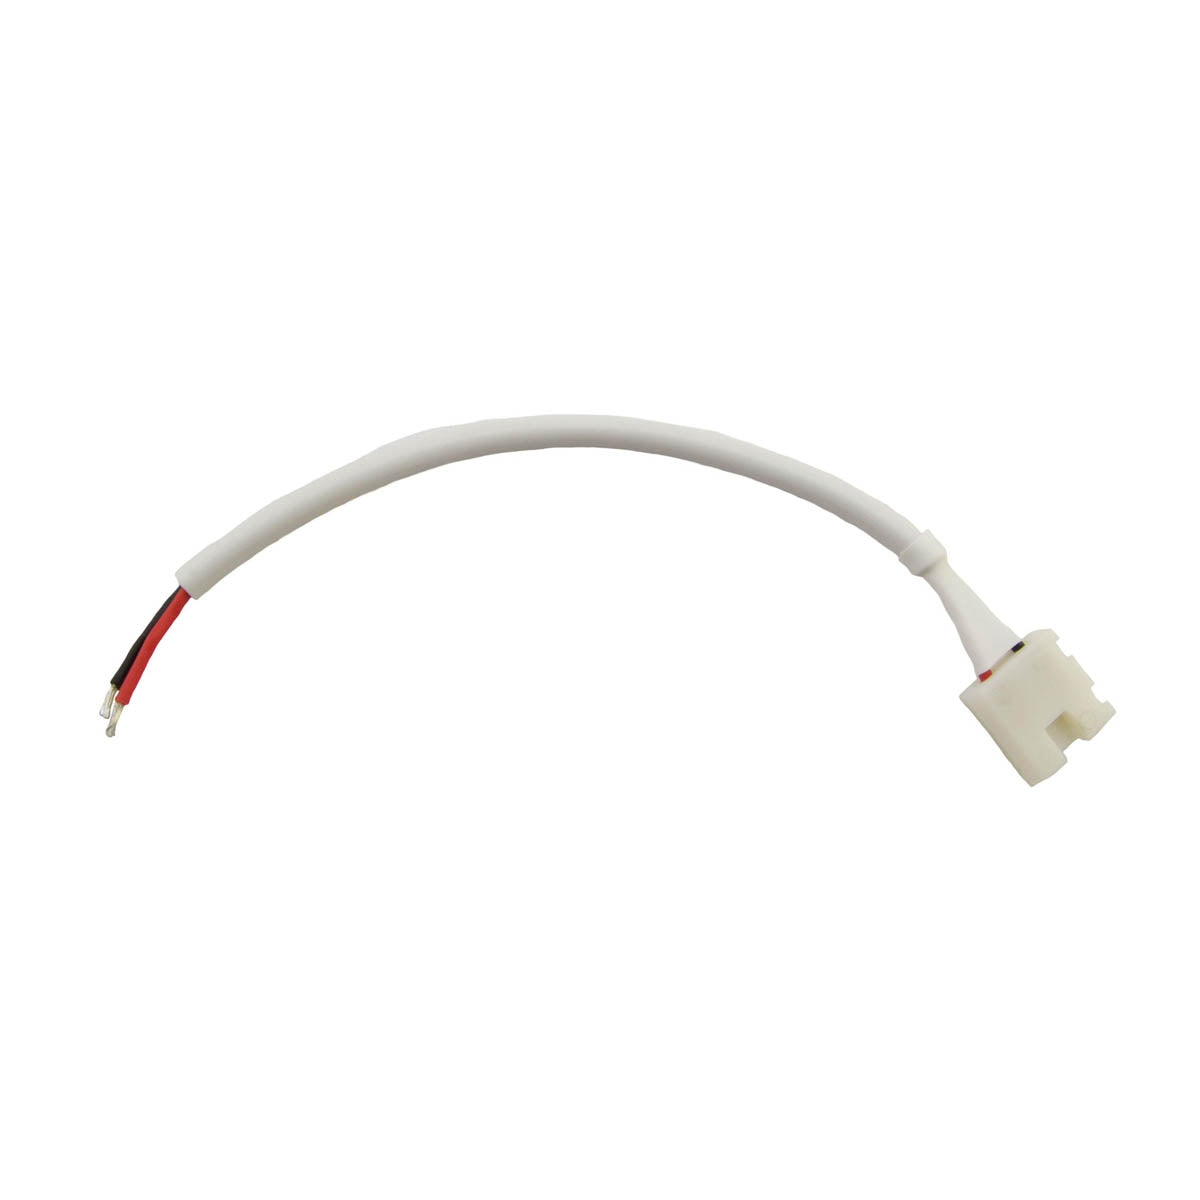 ClickTight 24in. Splice Connector for Blaze LED Tape Lights